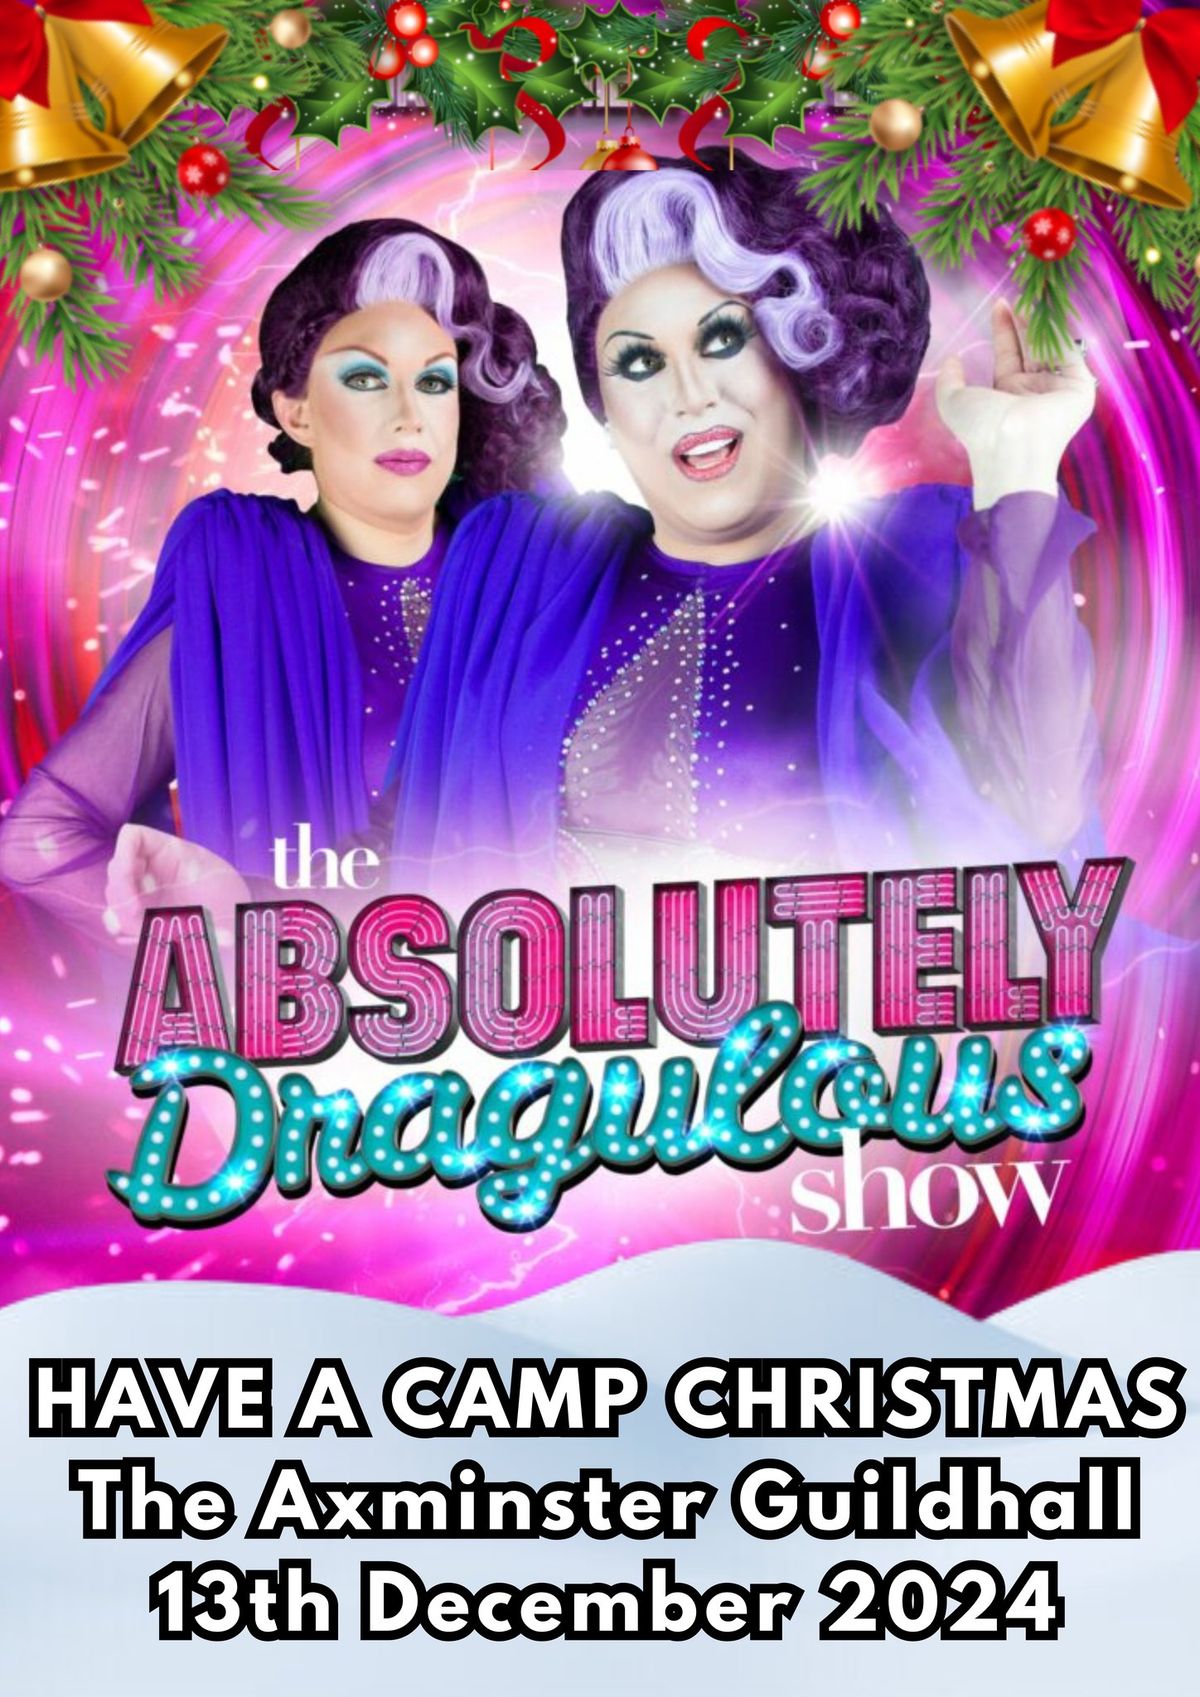 Have a Camp Christmas with Absolutely Dragulous